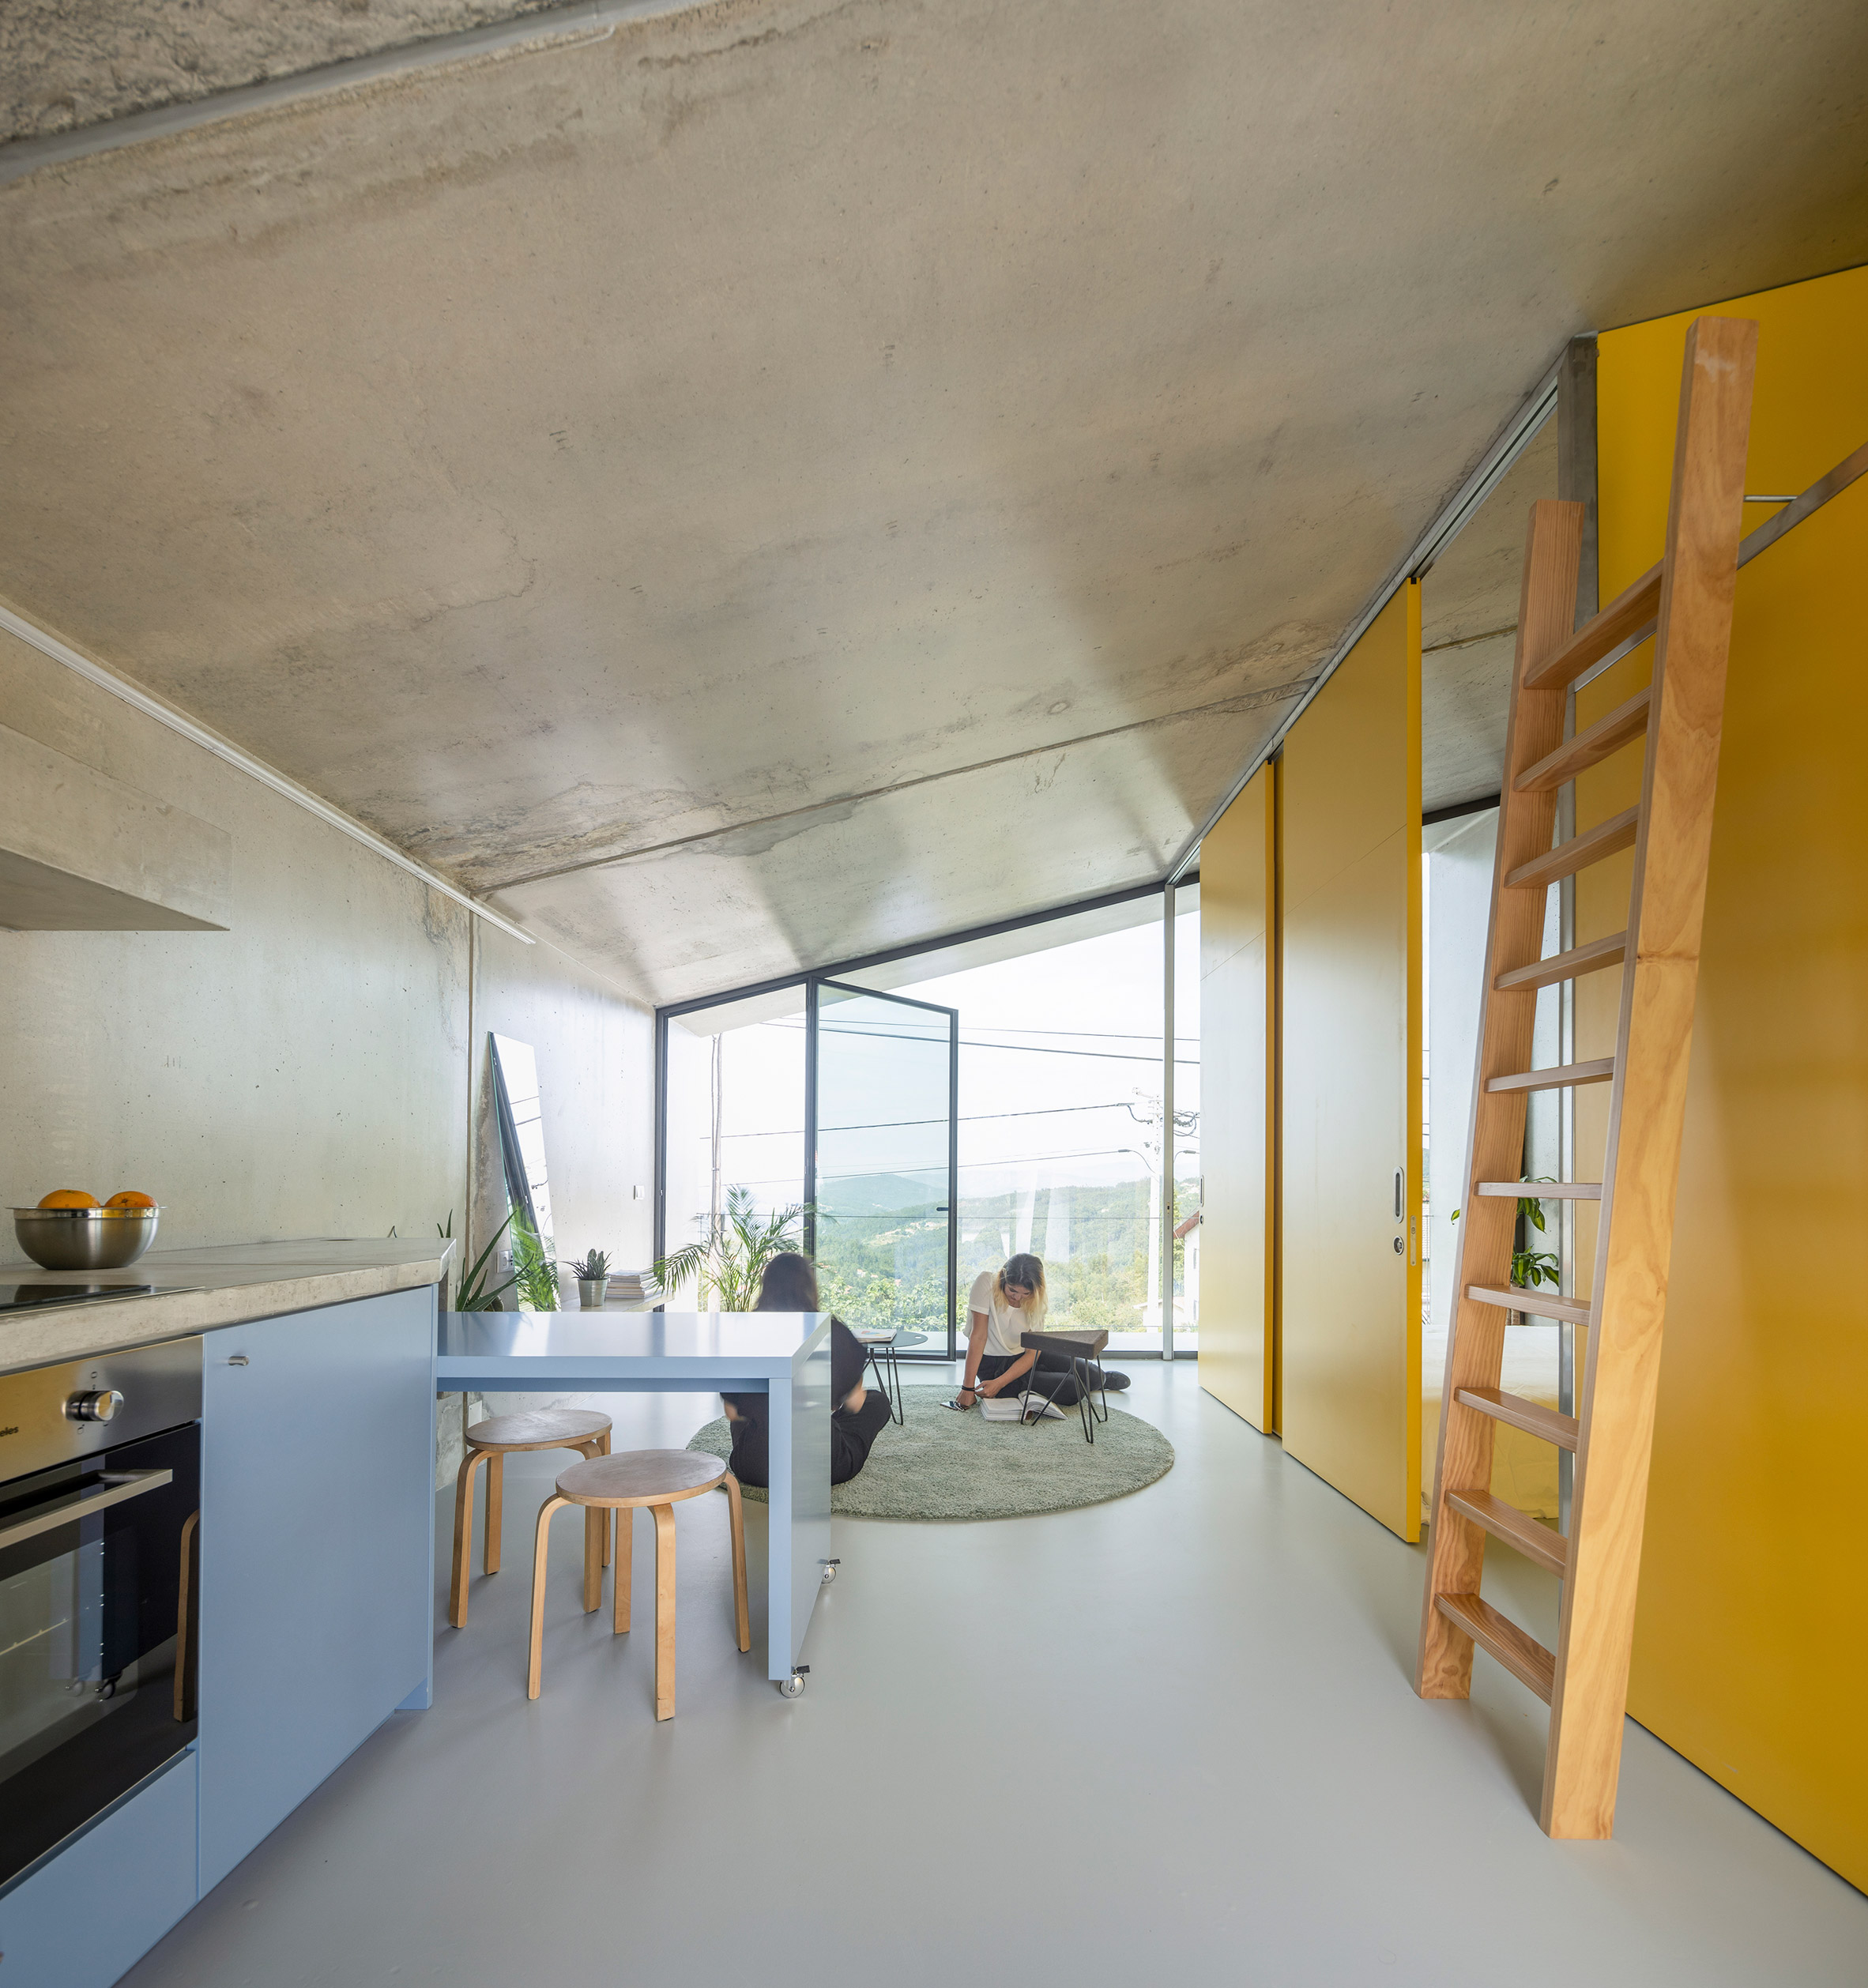 Living area of VDC modular prefabricated concrete housing by Summary in Portugal